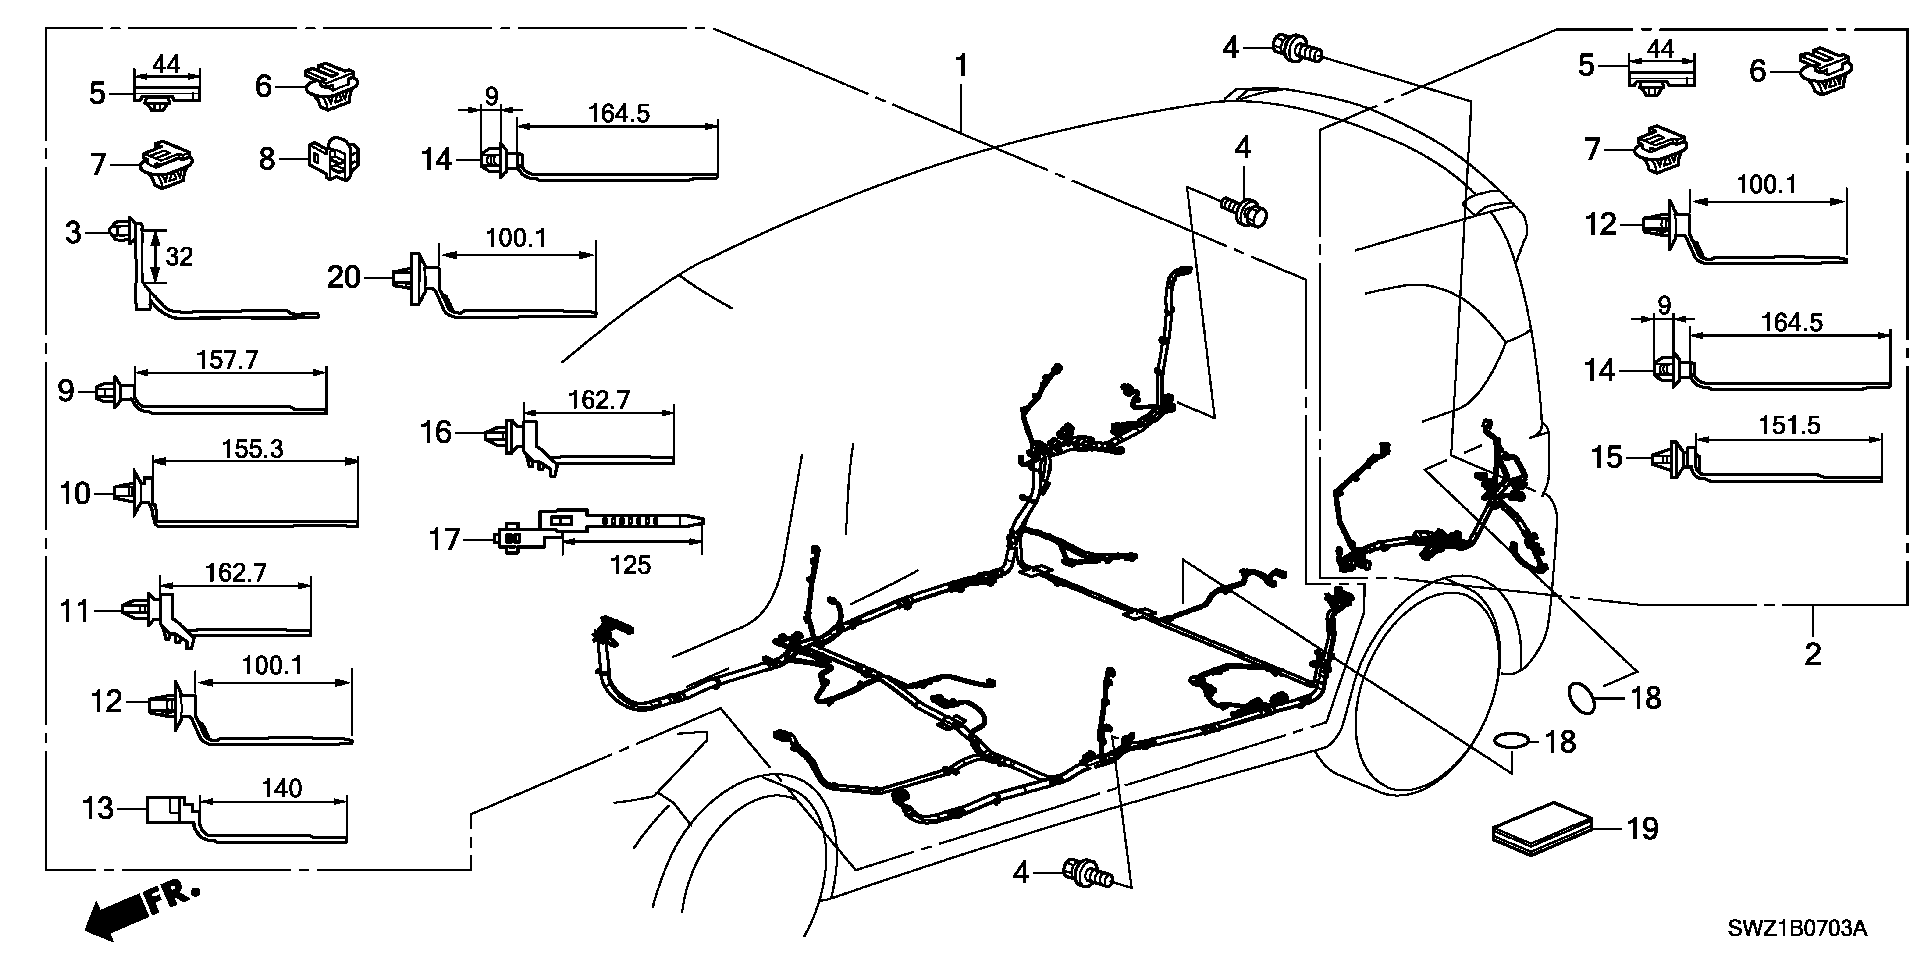 WIRE HARNESS(4)